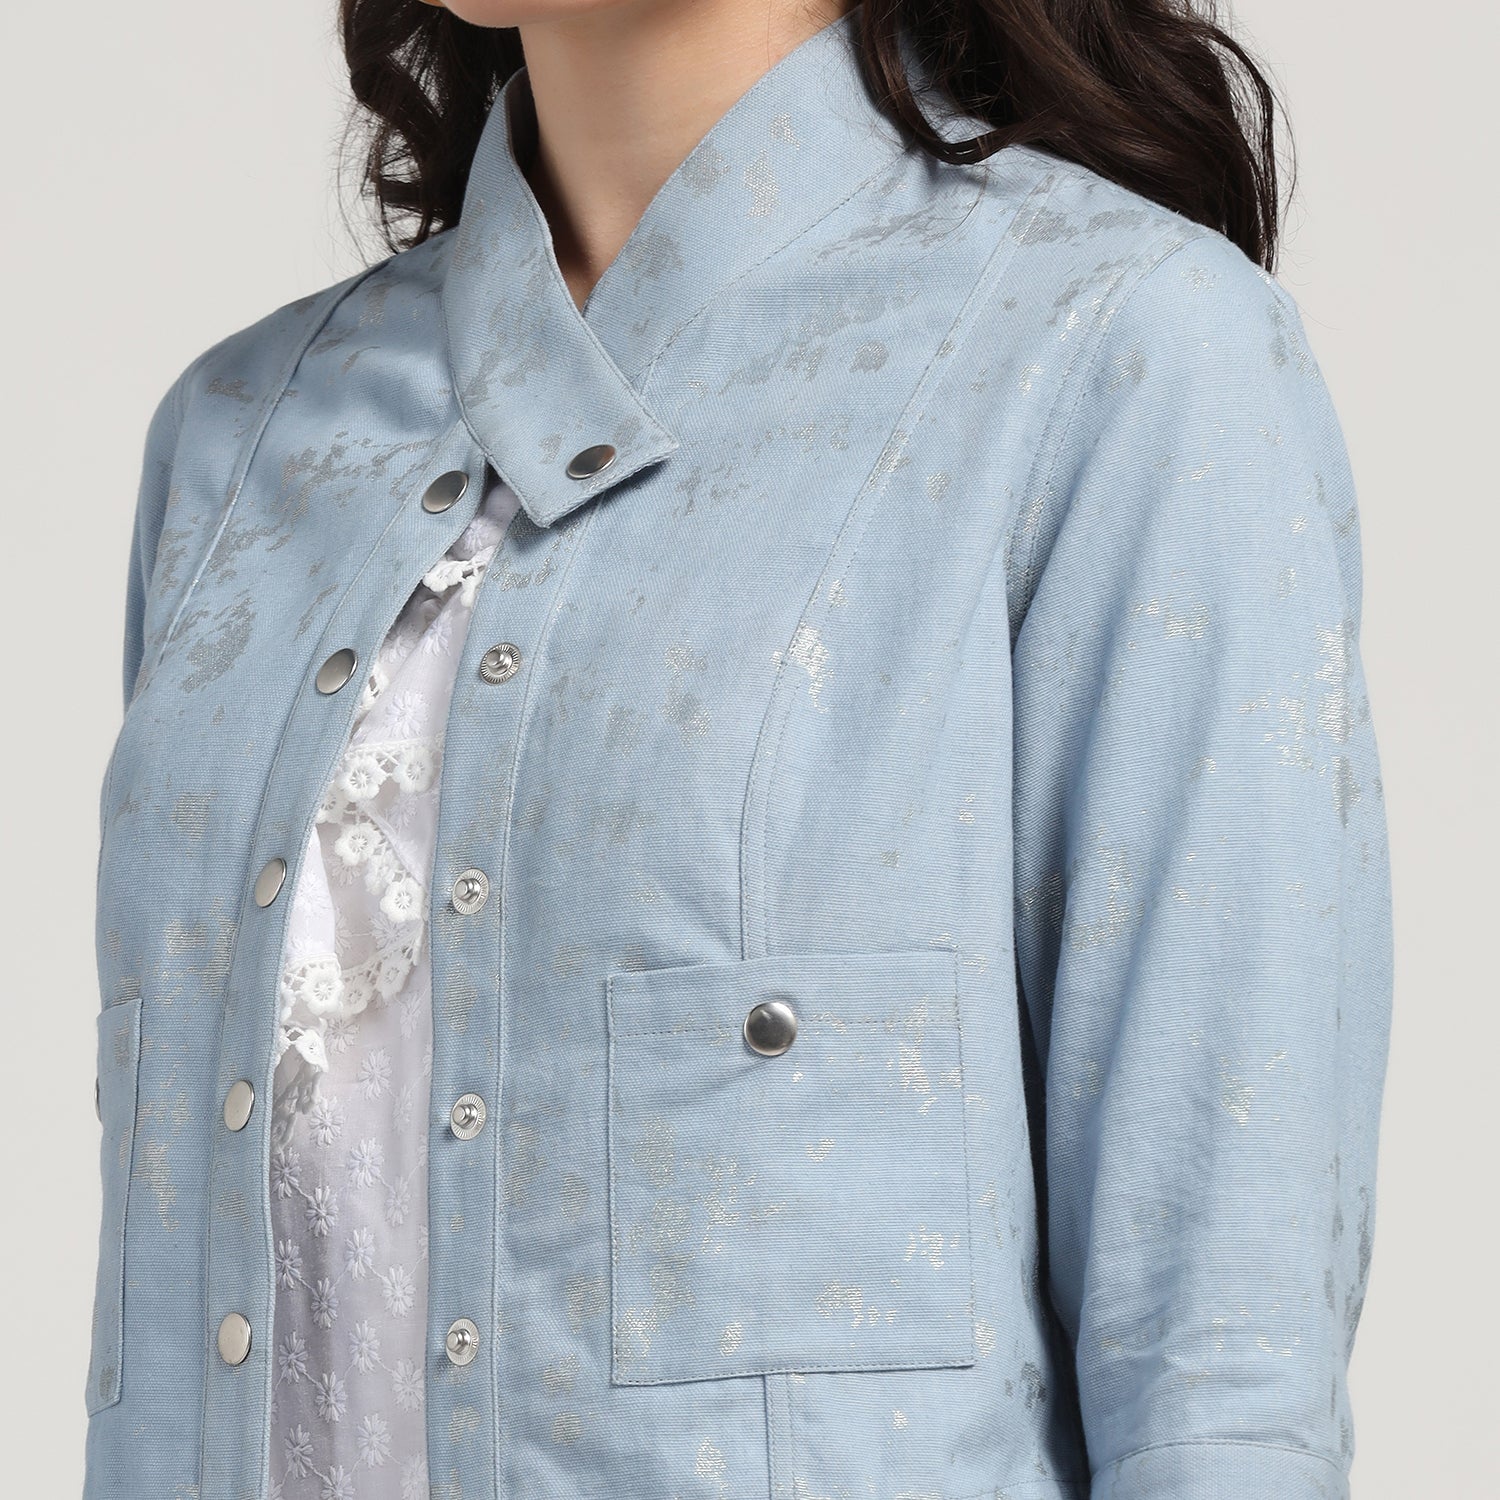 Blue Jacket With Overlap Collar